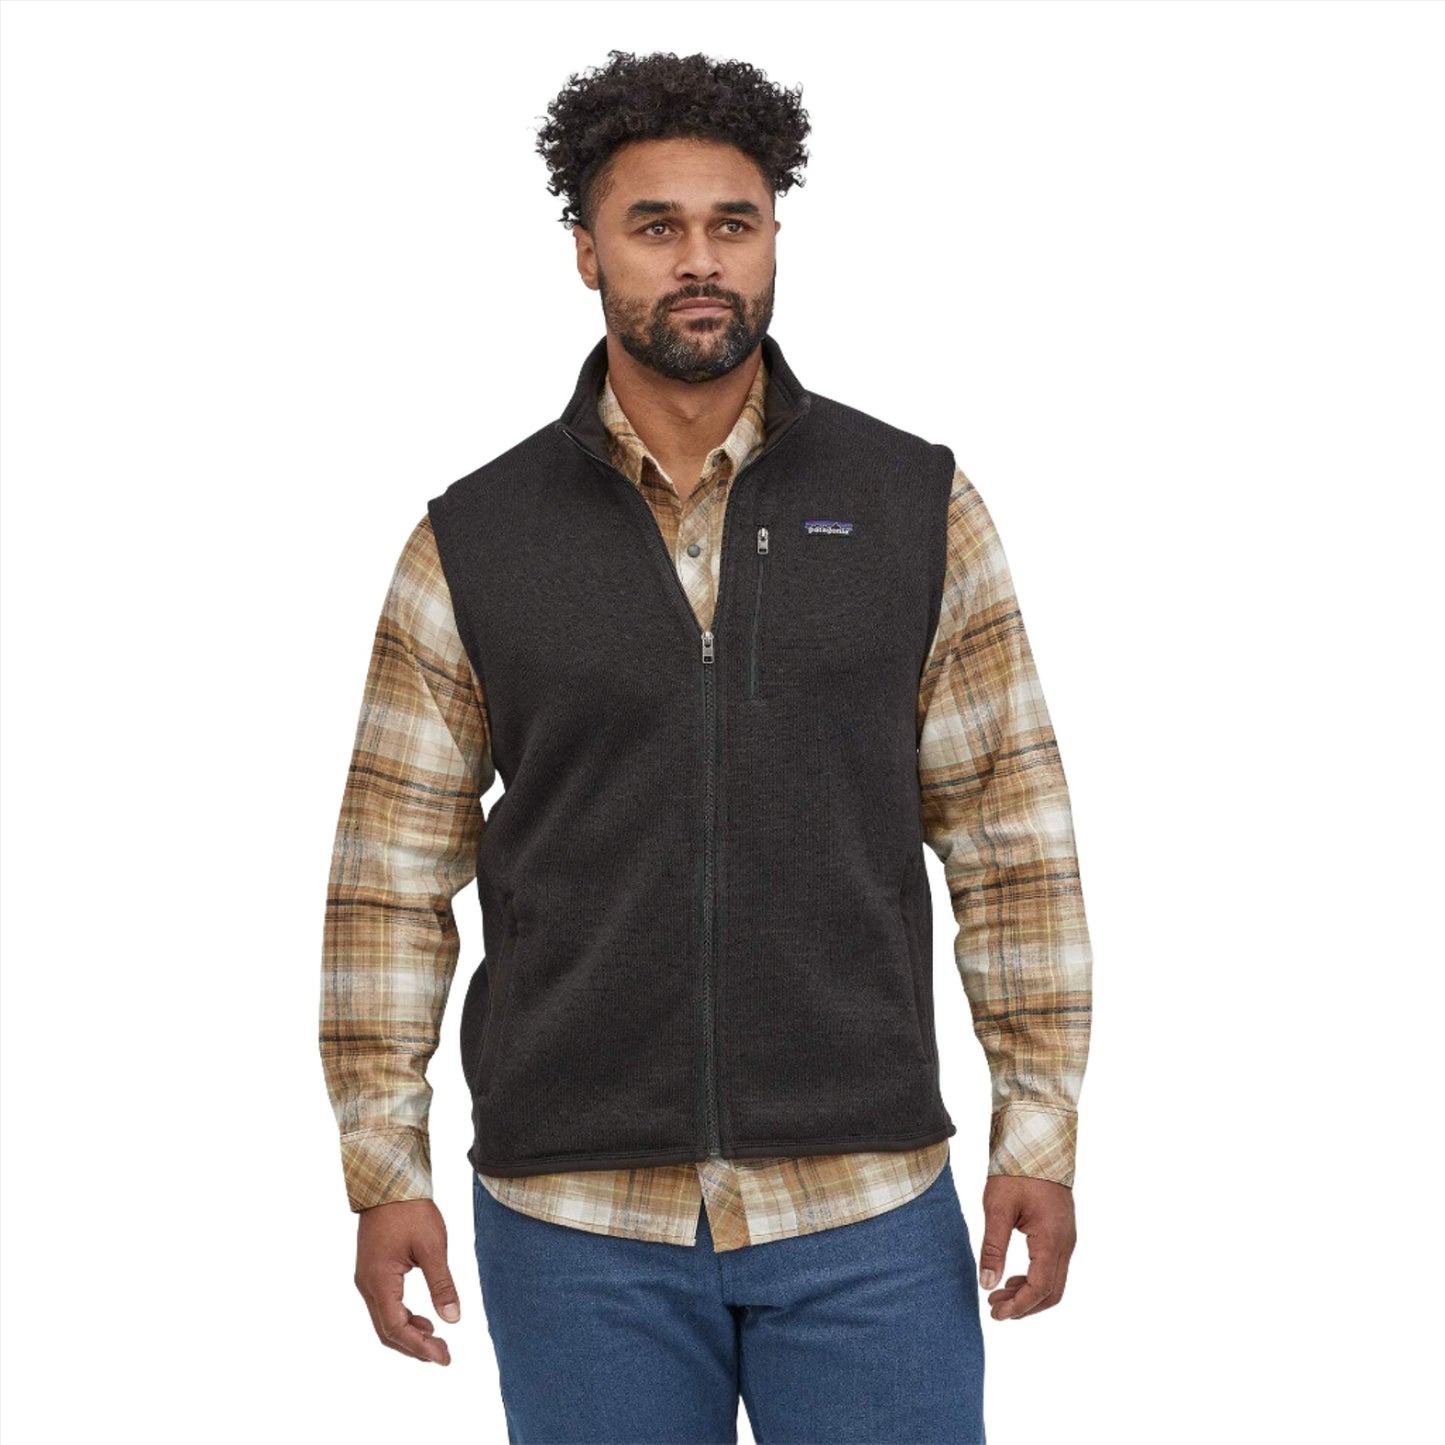 Men's Better Sweater Fleece Vest by Patagonia - The Luxury Promotional Gifts Company Limited